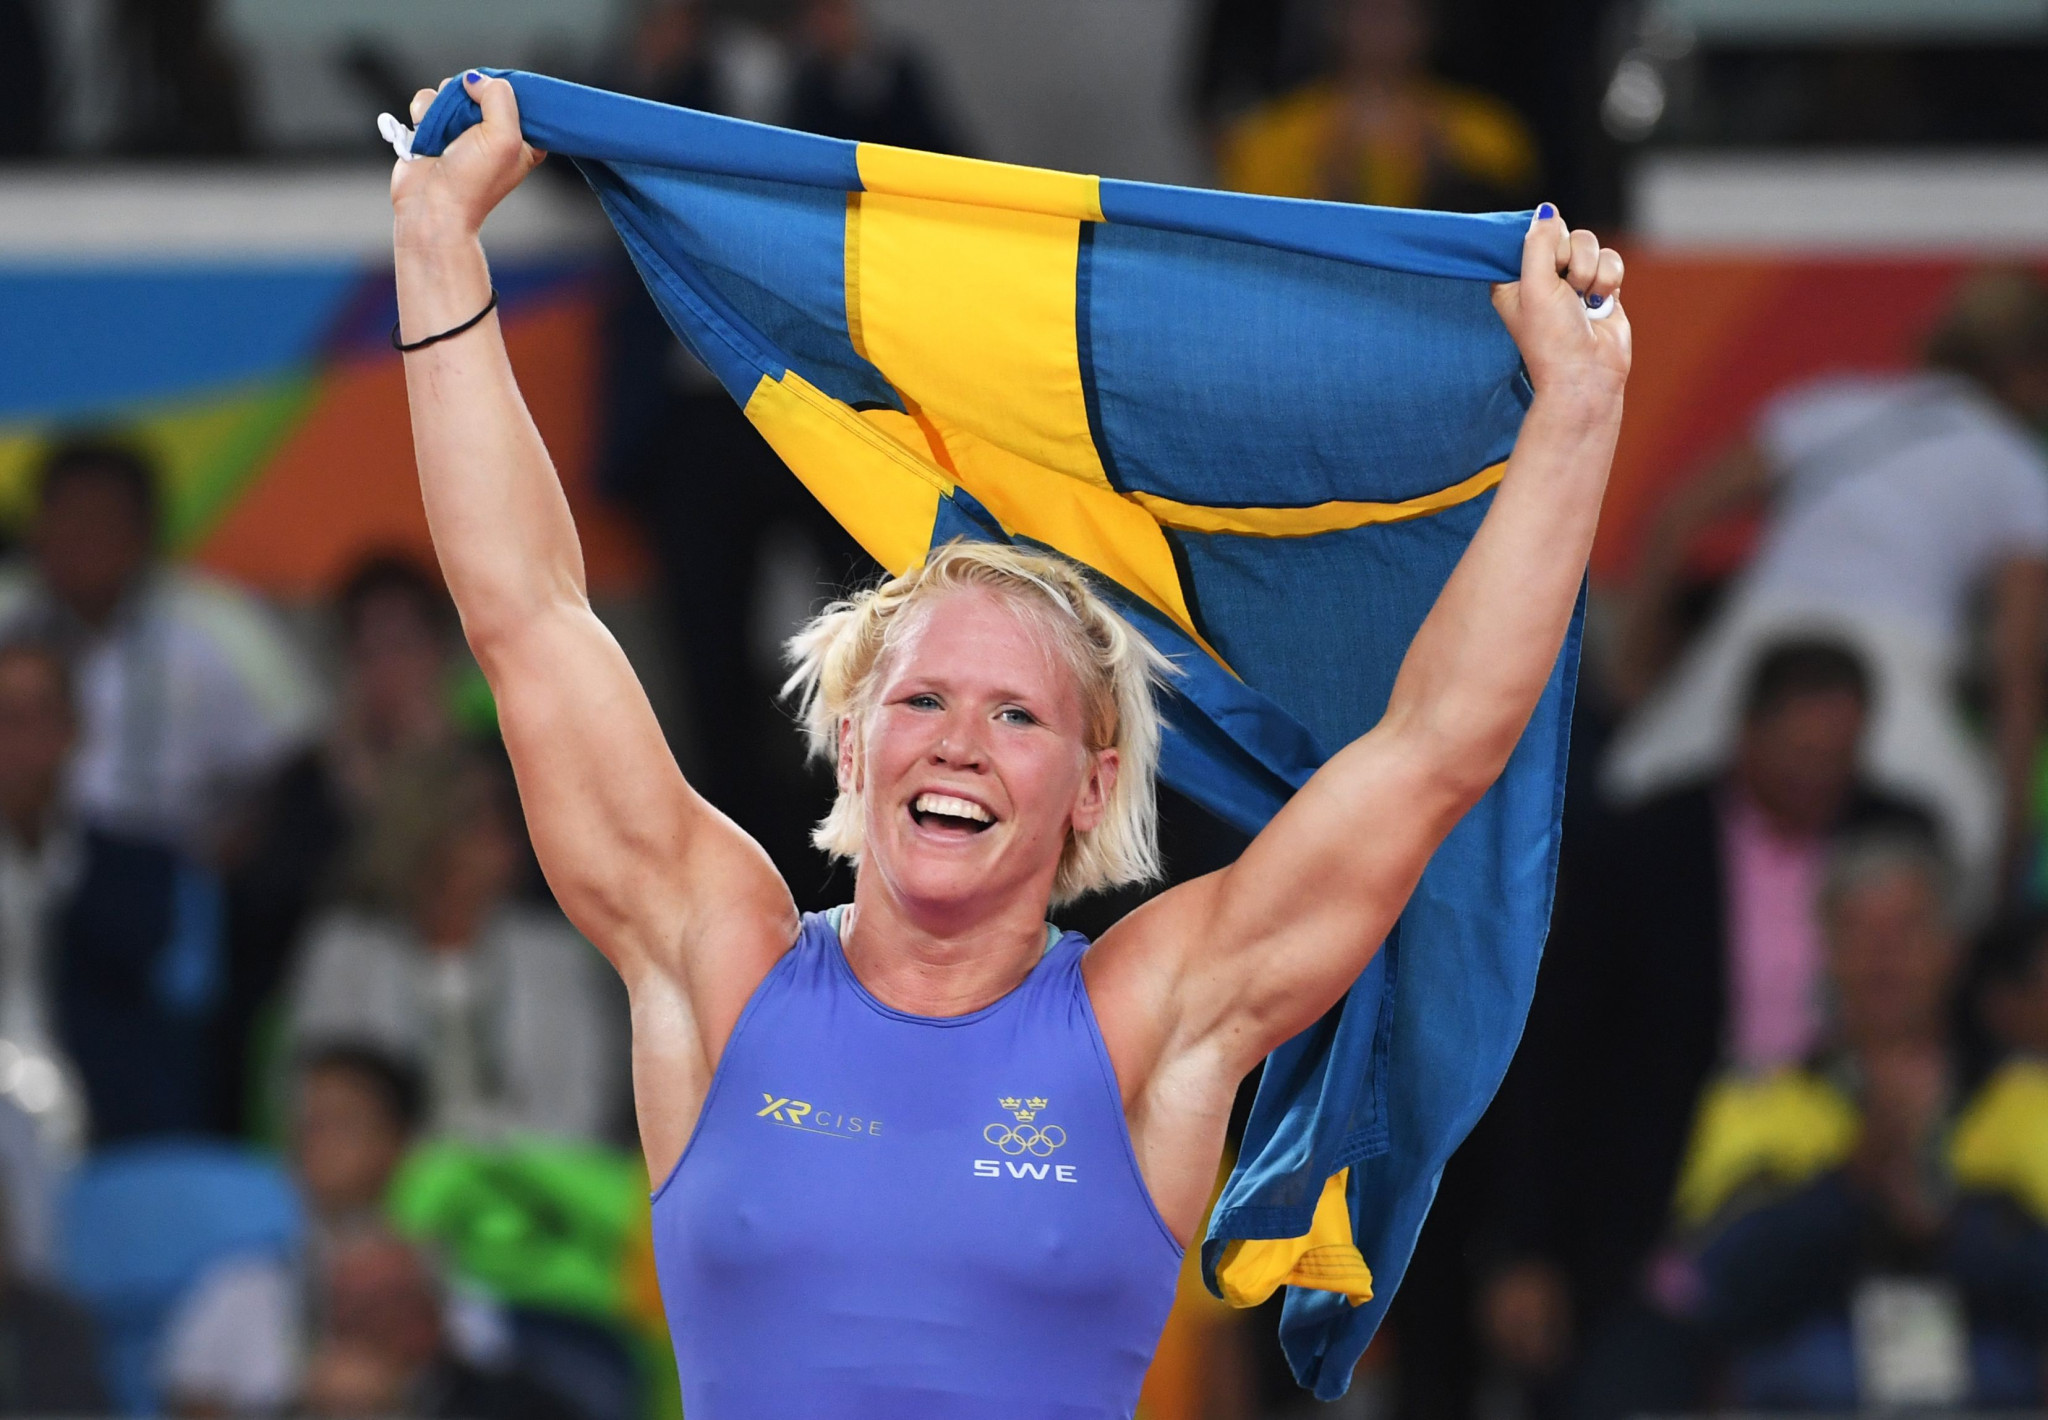 Jenny Fransson won bronze at the Rio 2016 Olympics but will now miss Tokyo 2020 ©Getty Images